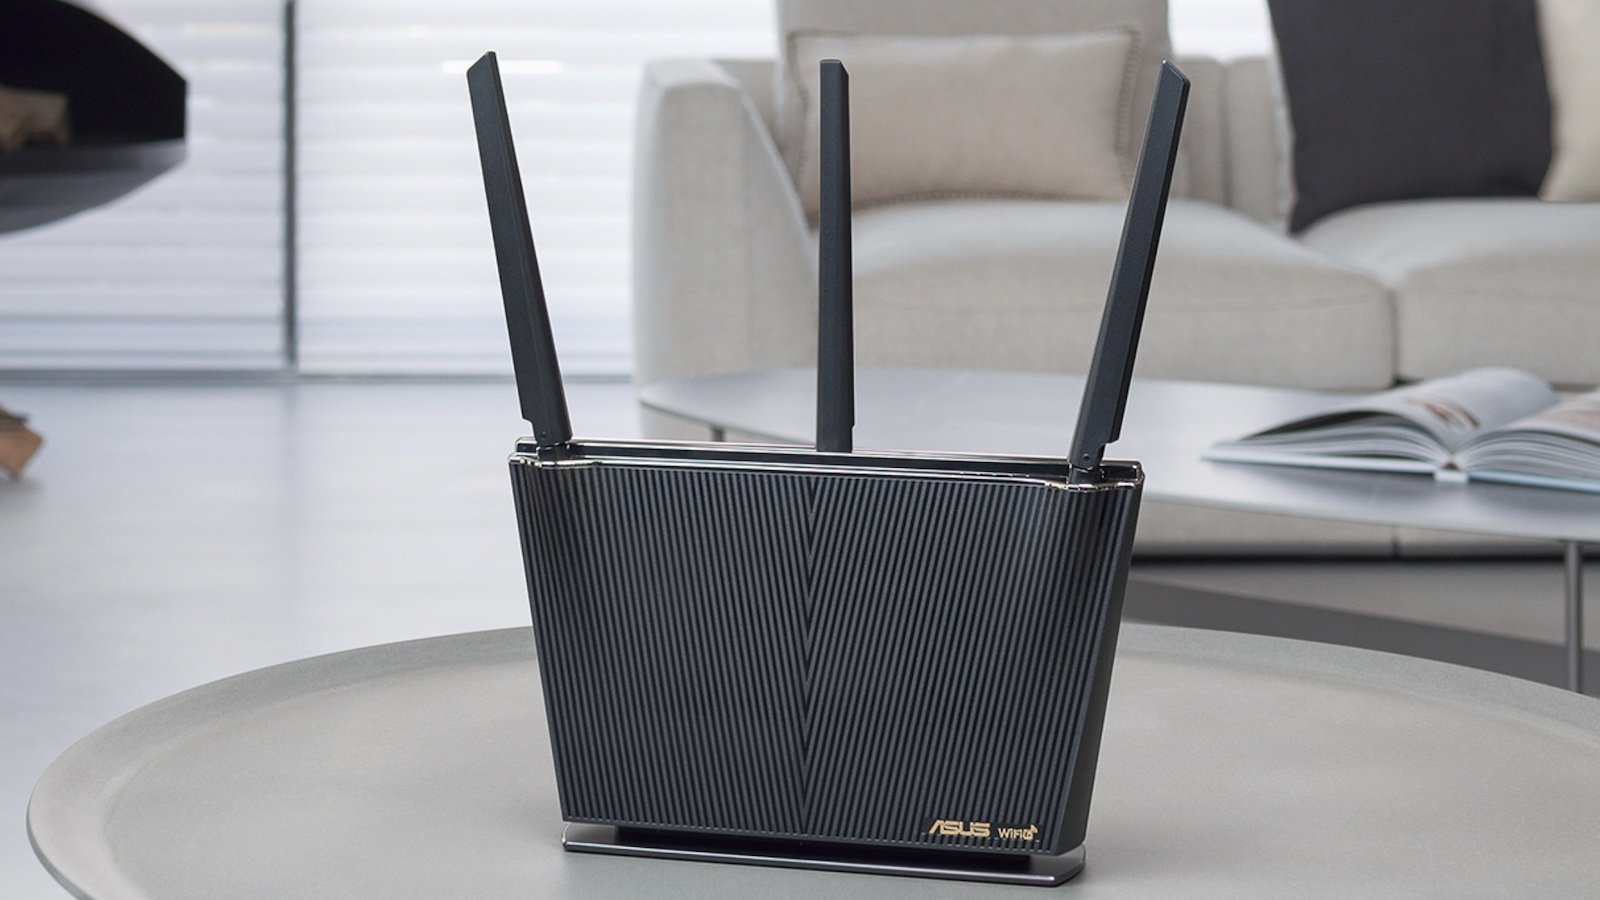 ASUS RT-AX68U dual-band Wi-Fi 6 router lets you connect to it from anywhere in the world